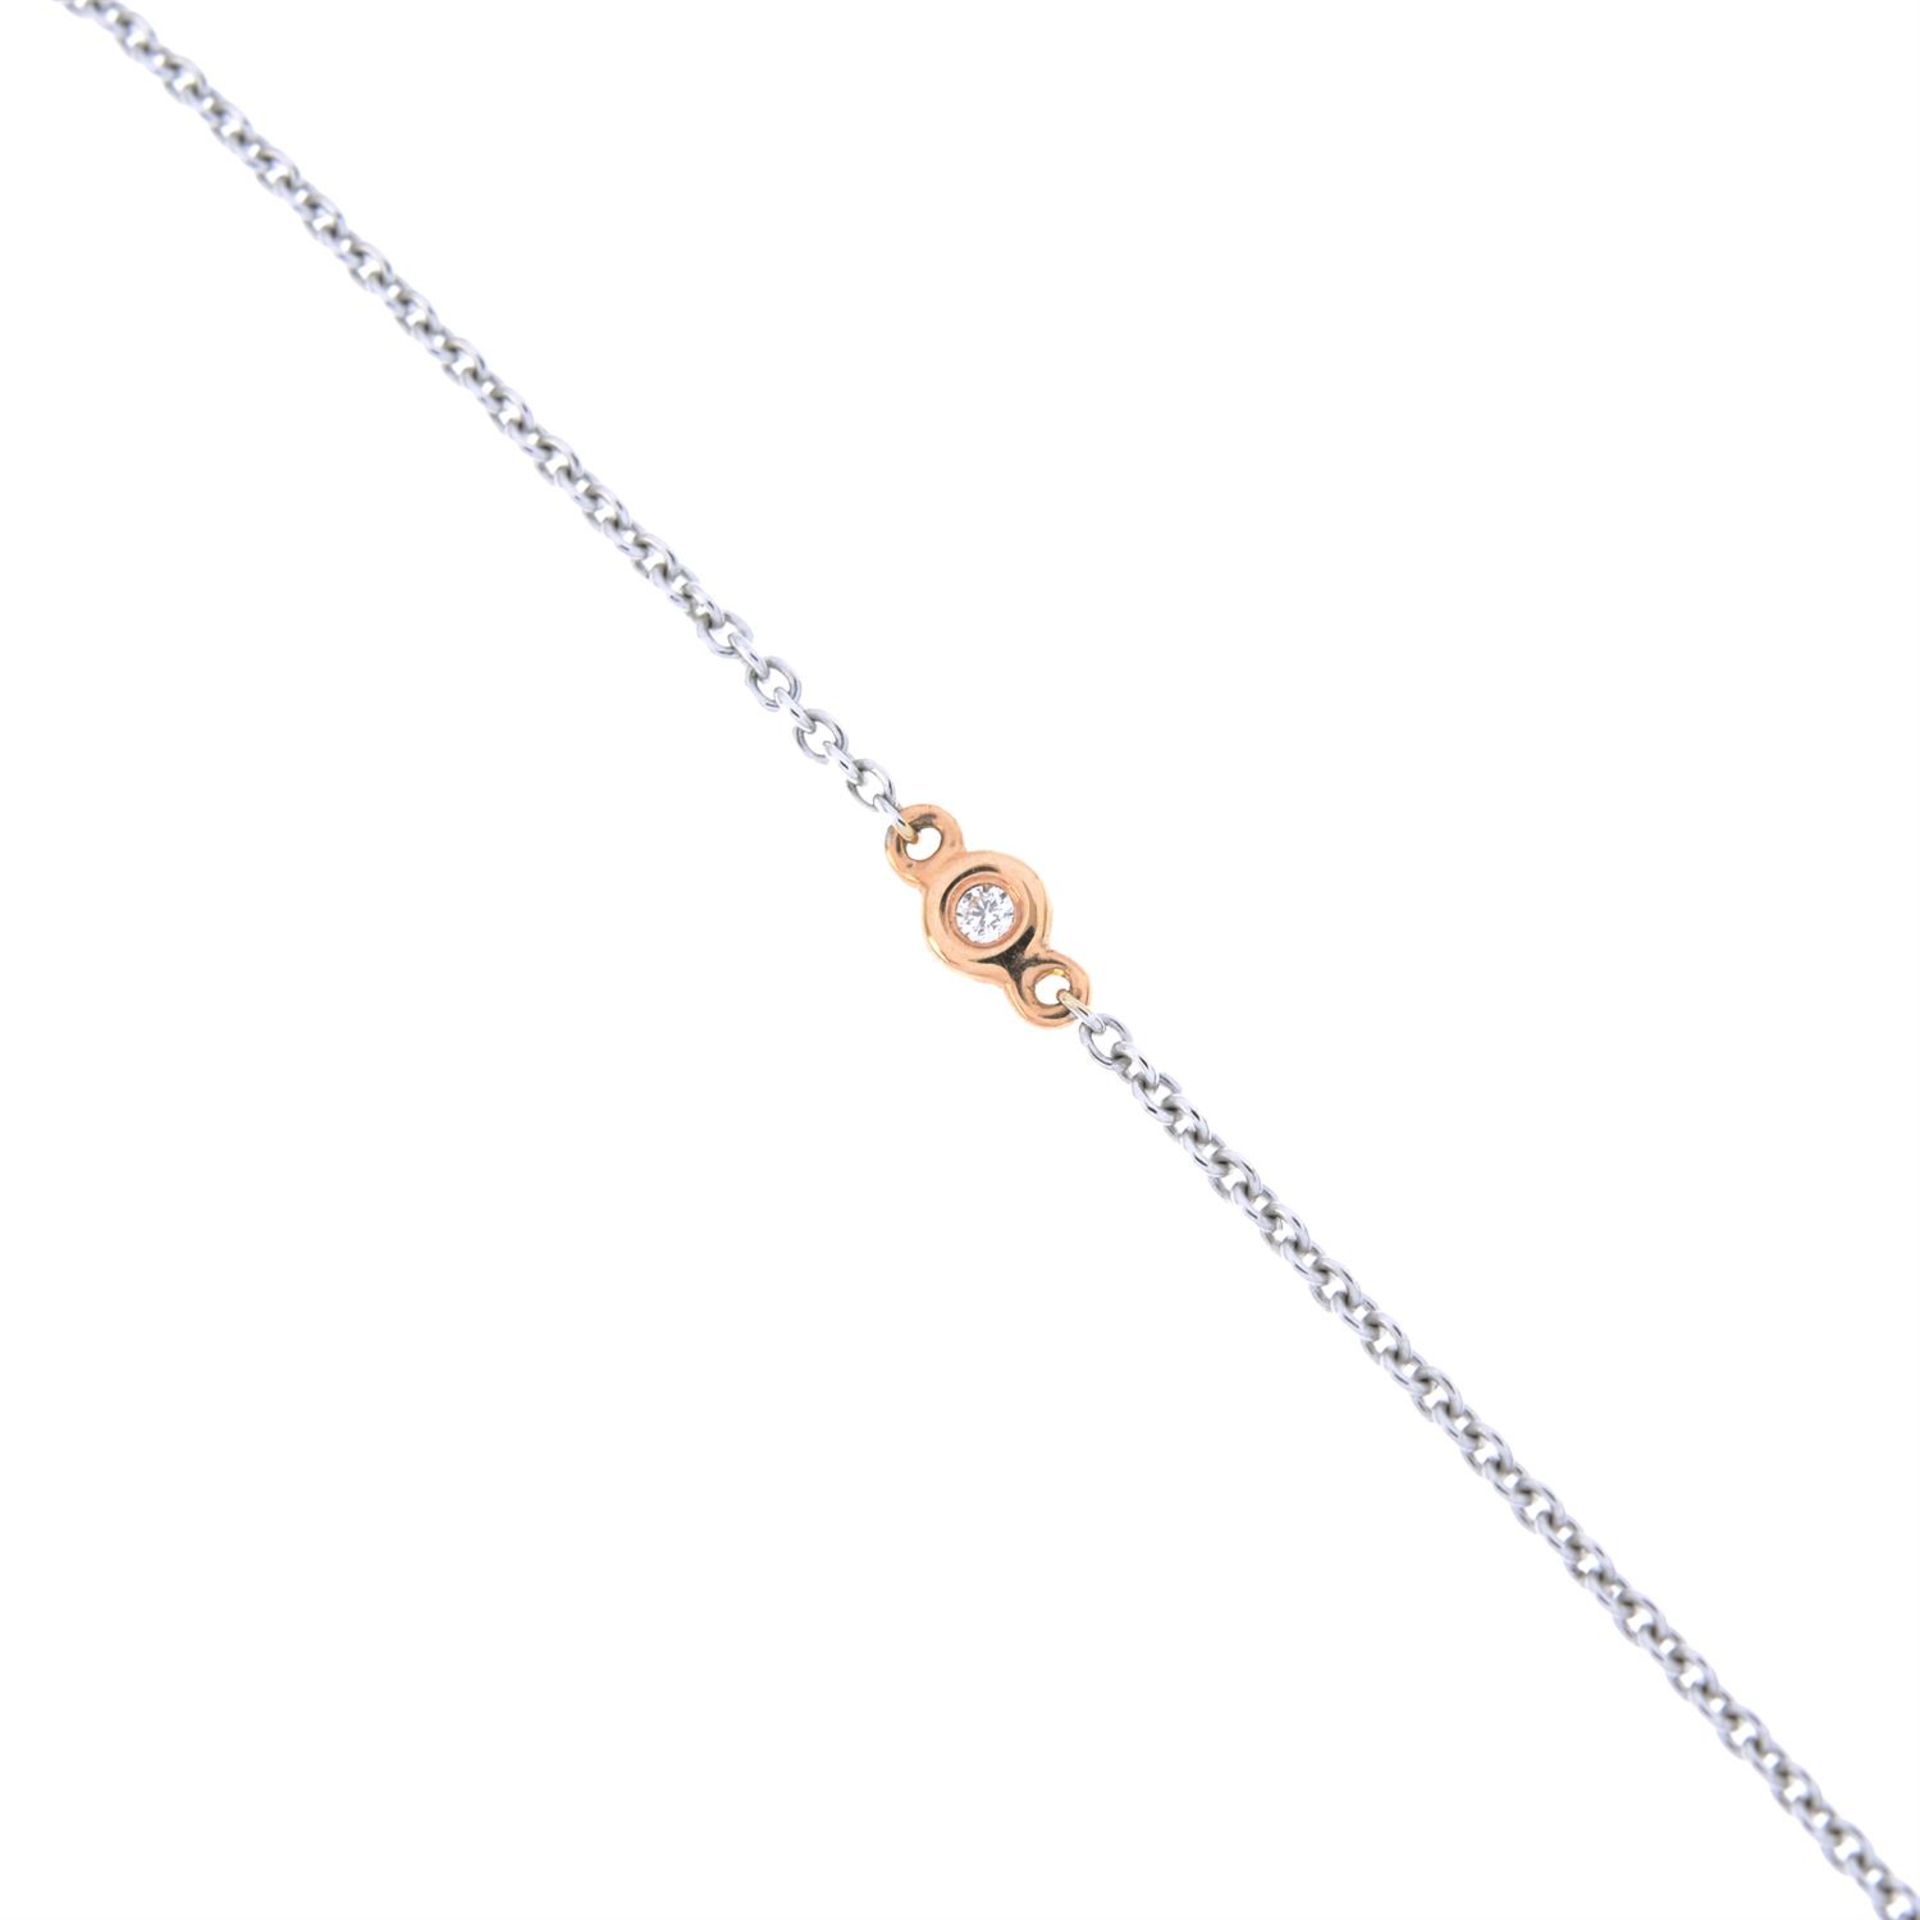 18ct gold diamond highlight necklace - Image 2 of 2